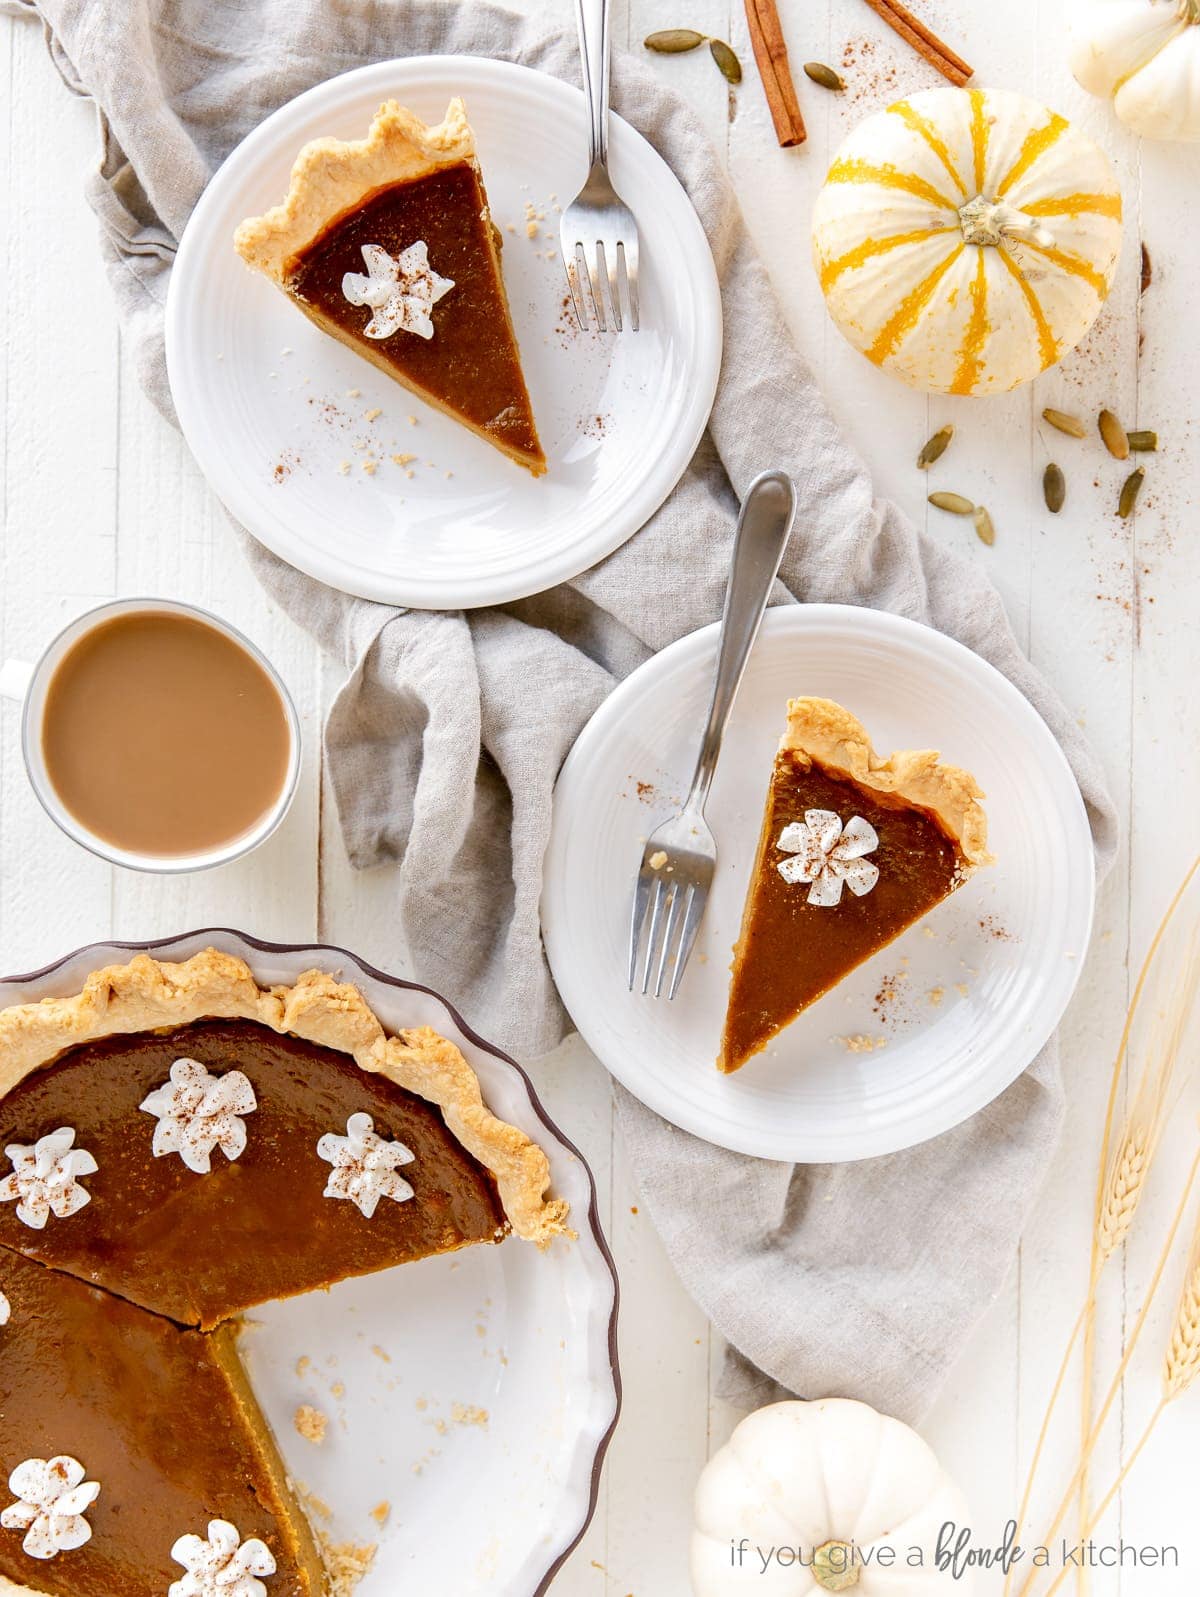 pumpkin pie slices on round plates with forks next to pie plate with remaining pie